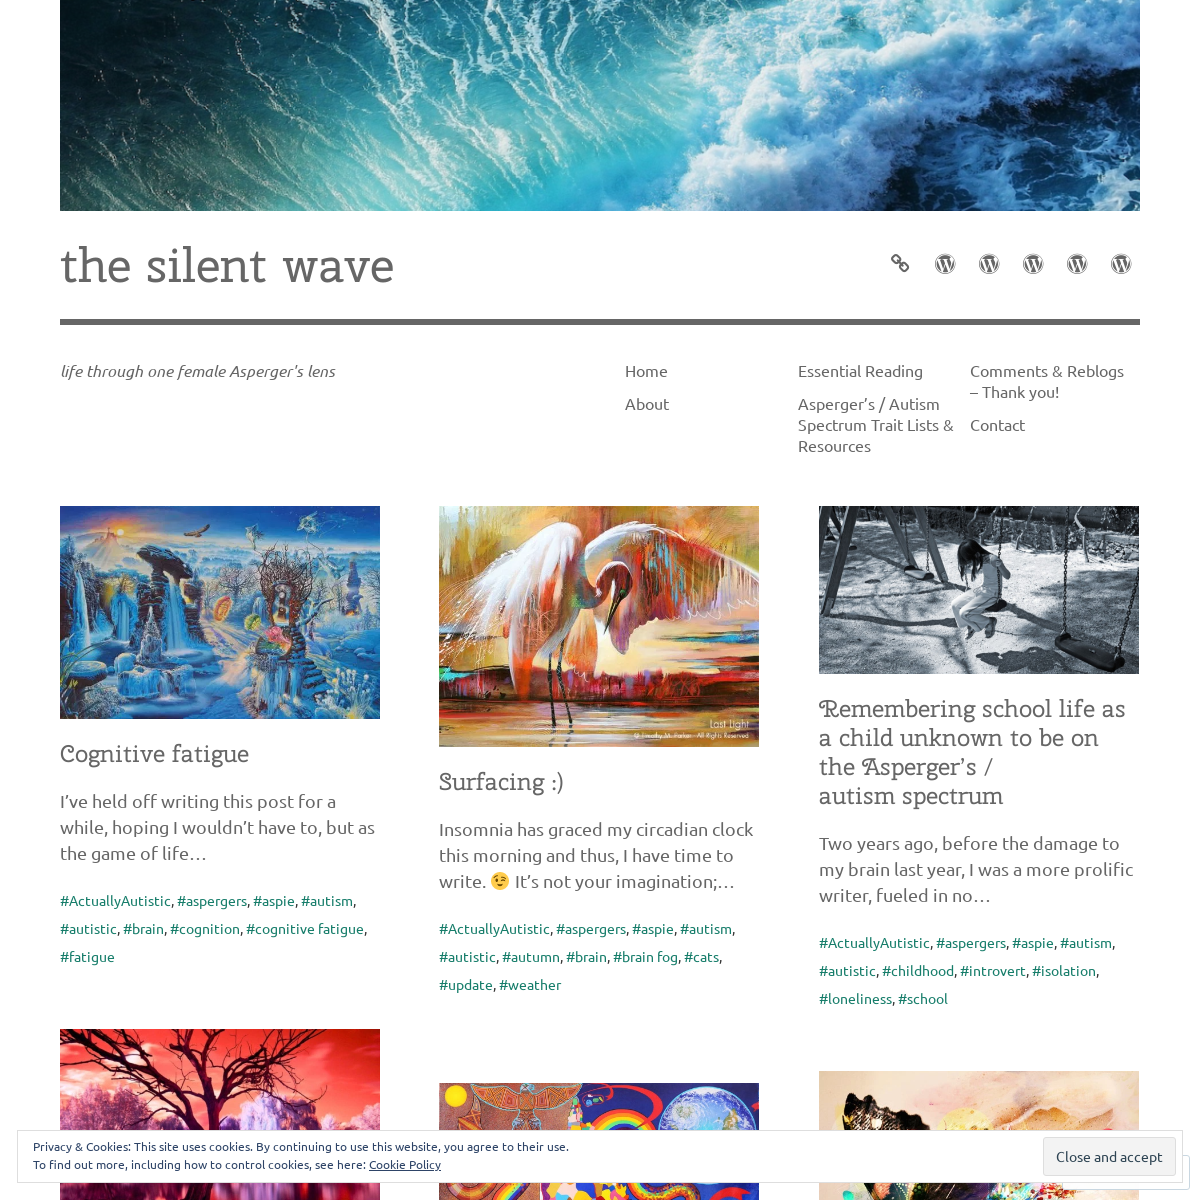 the silent wave – life through one female Asperger's lens